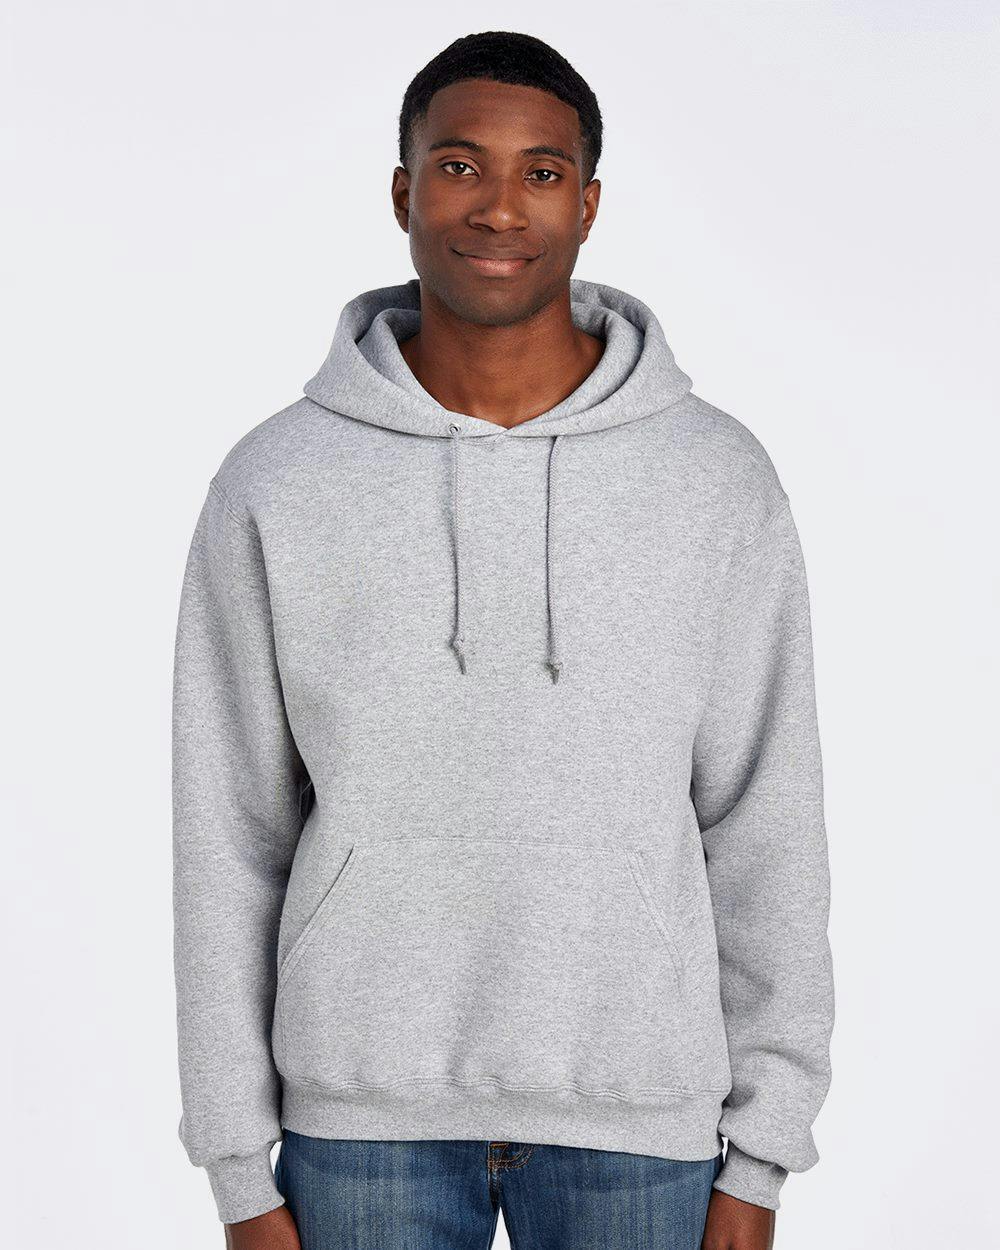 Image for Supercotton Hooded Sweatshirt - 82130R